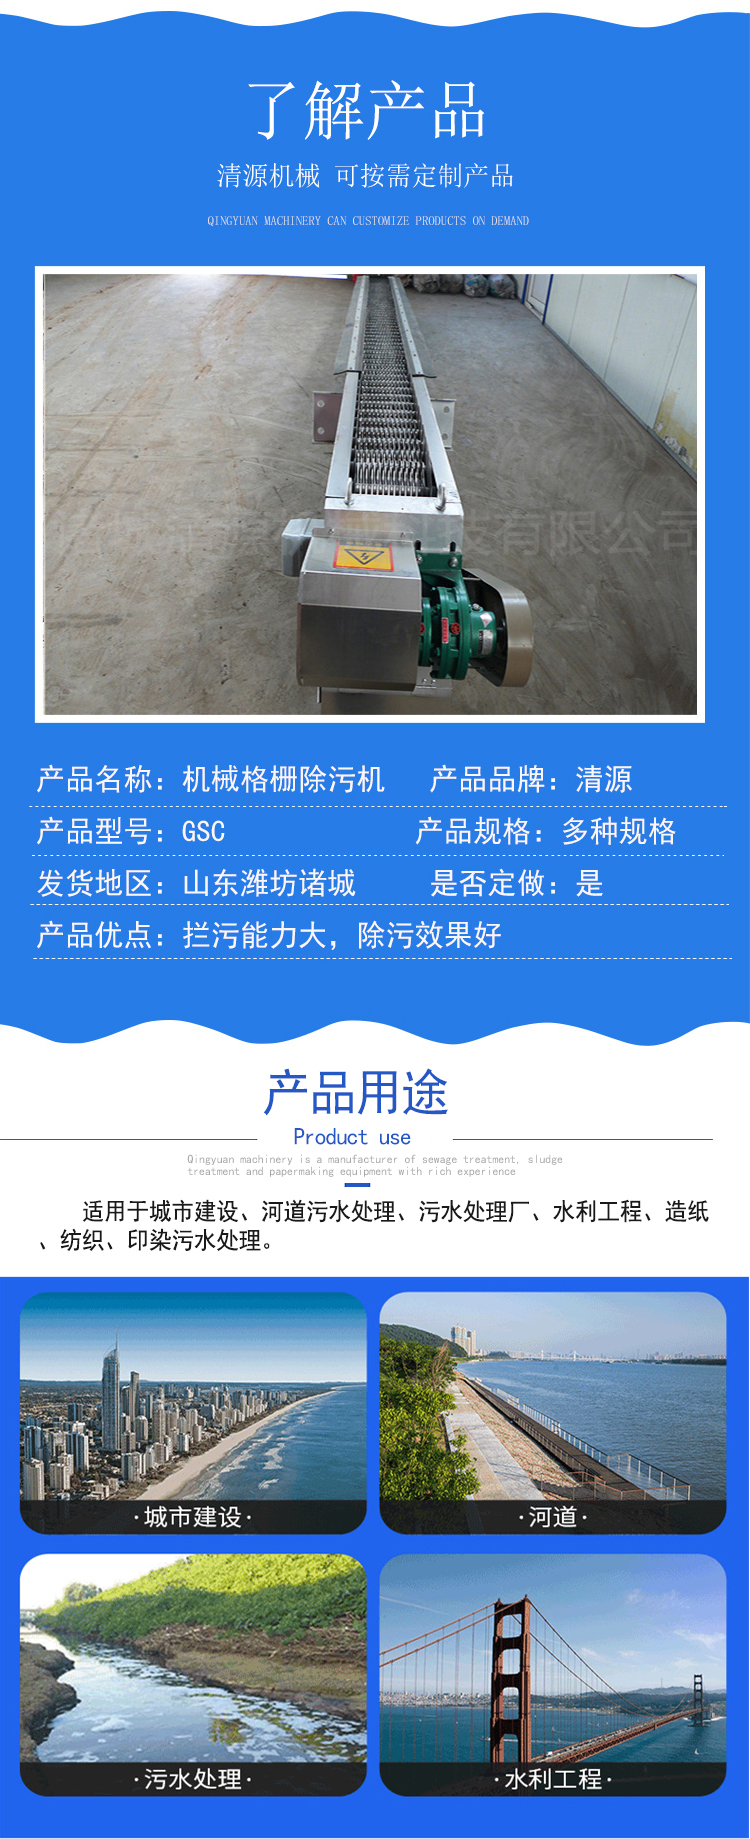 Mechanical grille cleaning machine, stainless steel grille cleaning machine, high-quality and low-cost cleaning source, convenient operation and maintenance